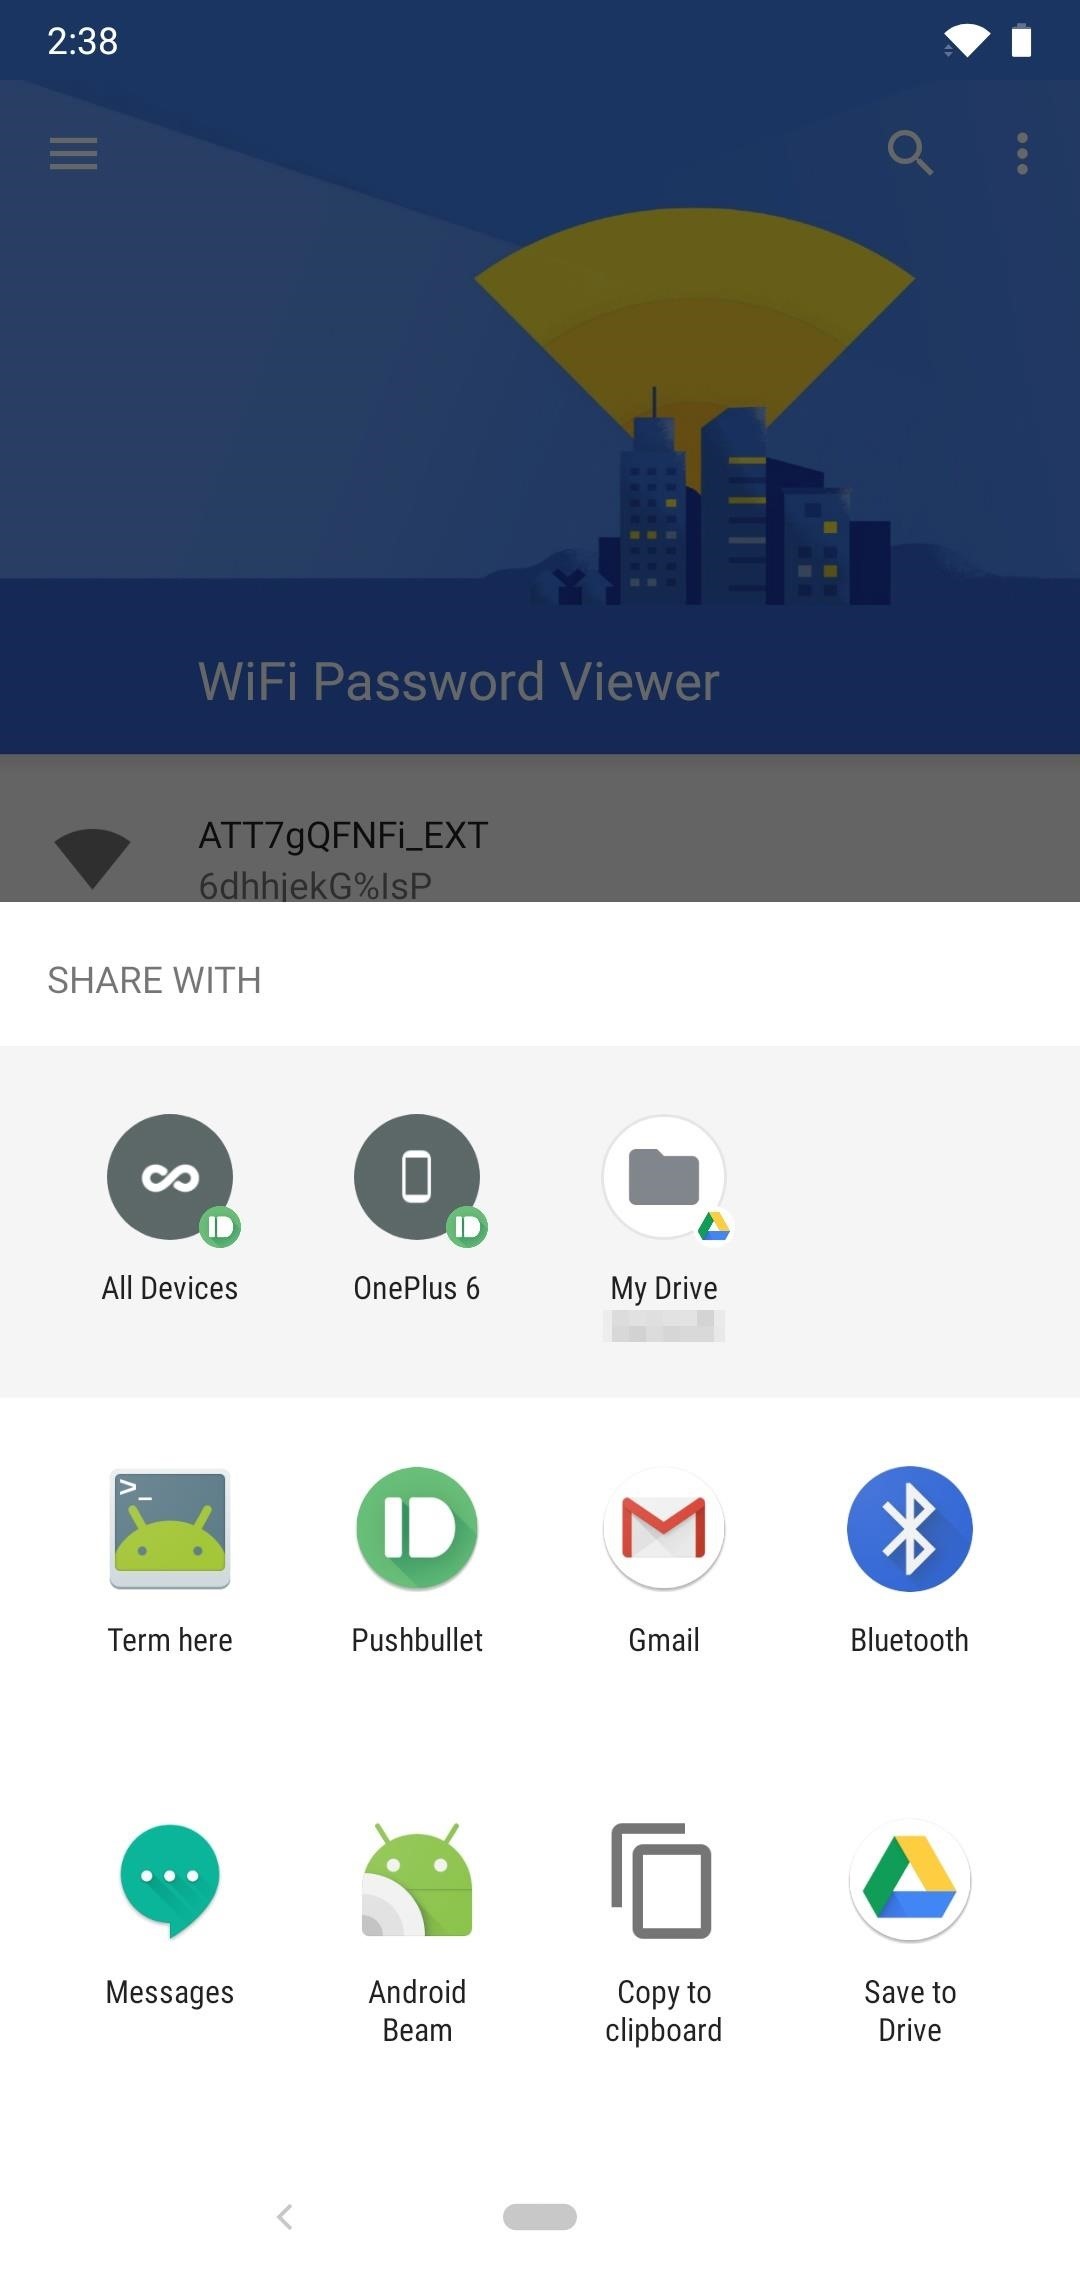 How to See Passwords for Wi-Fi Networks You